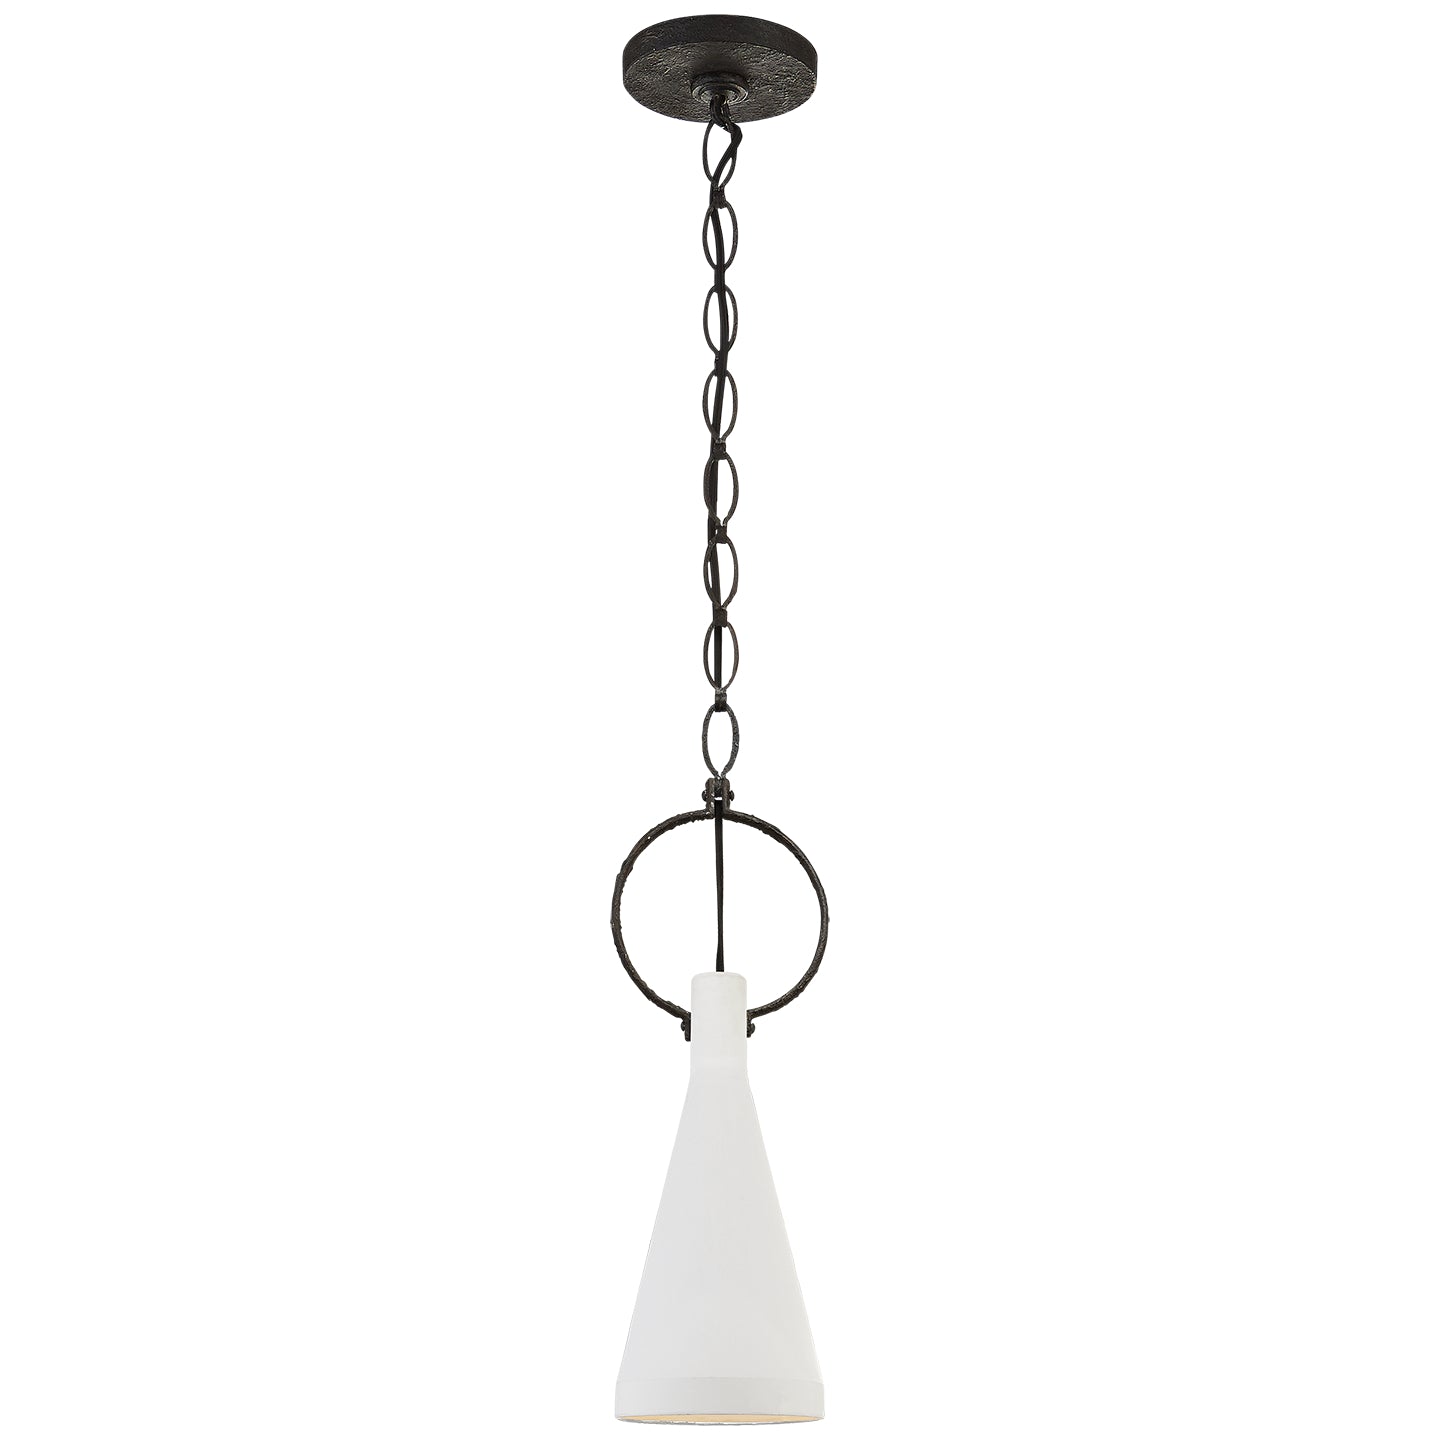 Visual Comfort Signature - SK 5360NR-PW - One Light Pendant - Limoges - Natural Rusted Iron